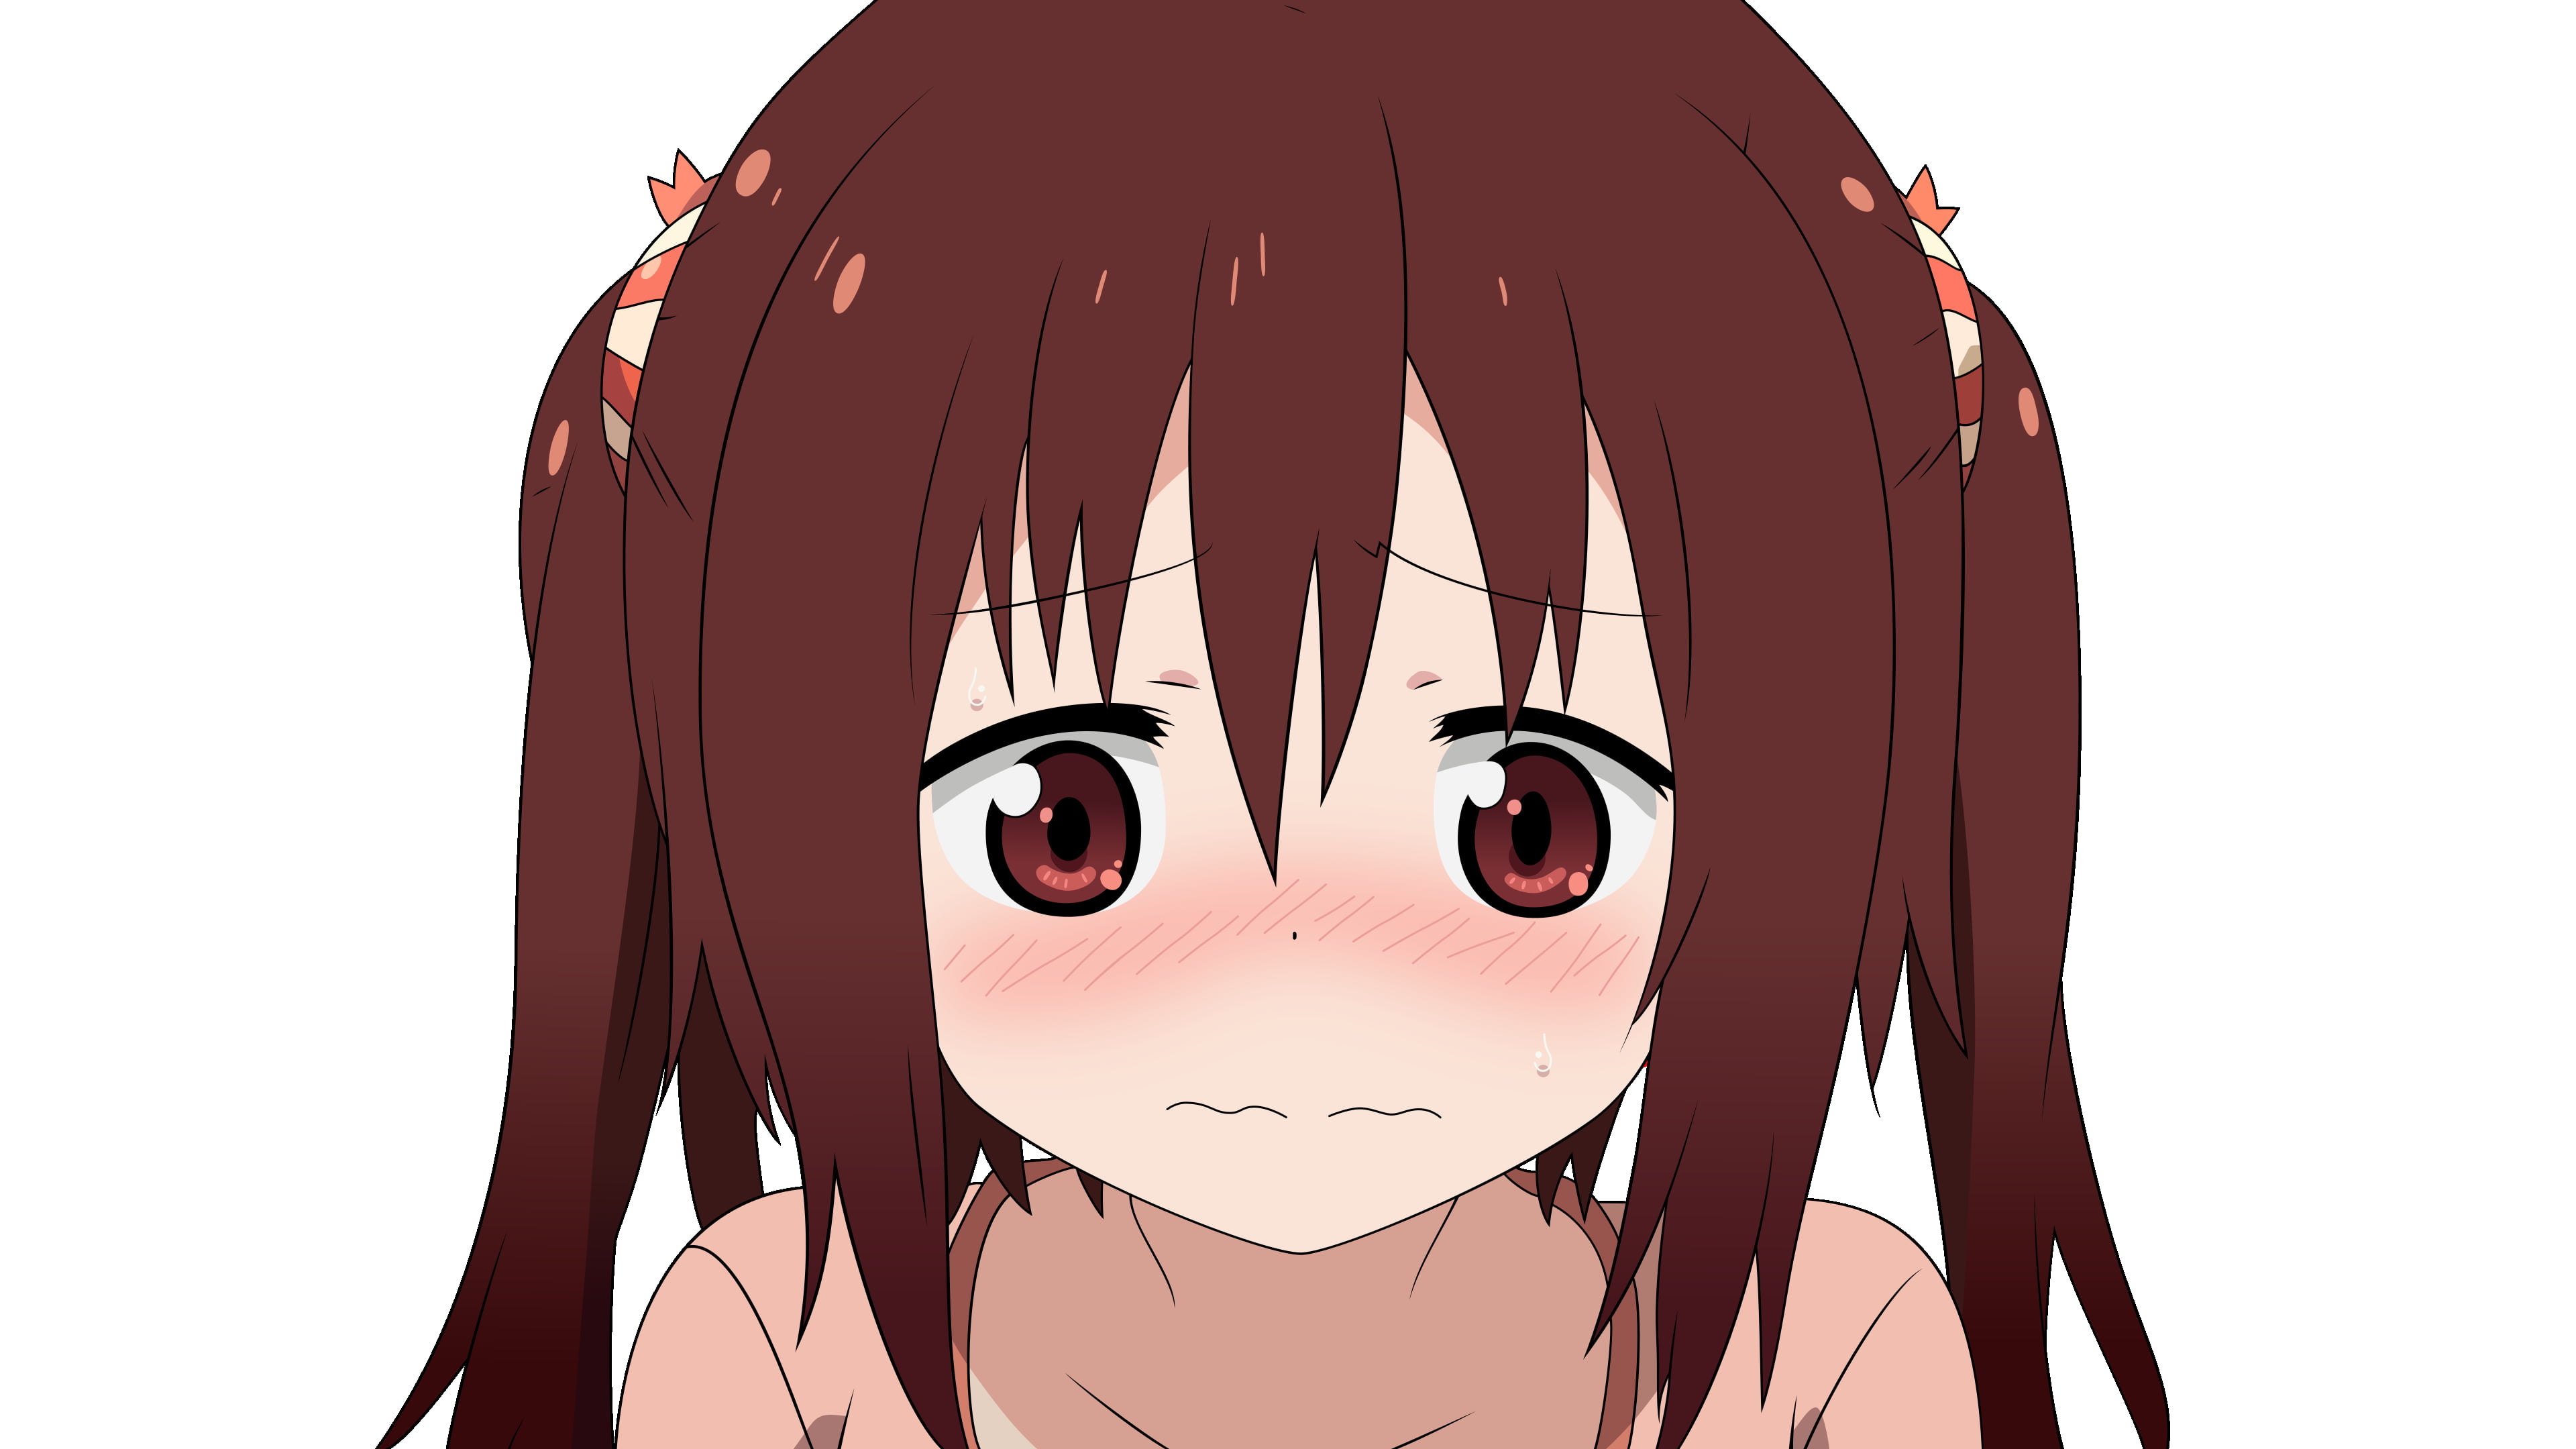 Animated brown haired girl looking down with sad facial expression